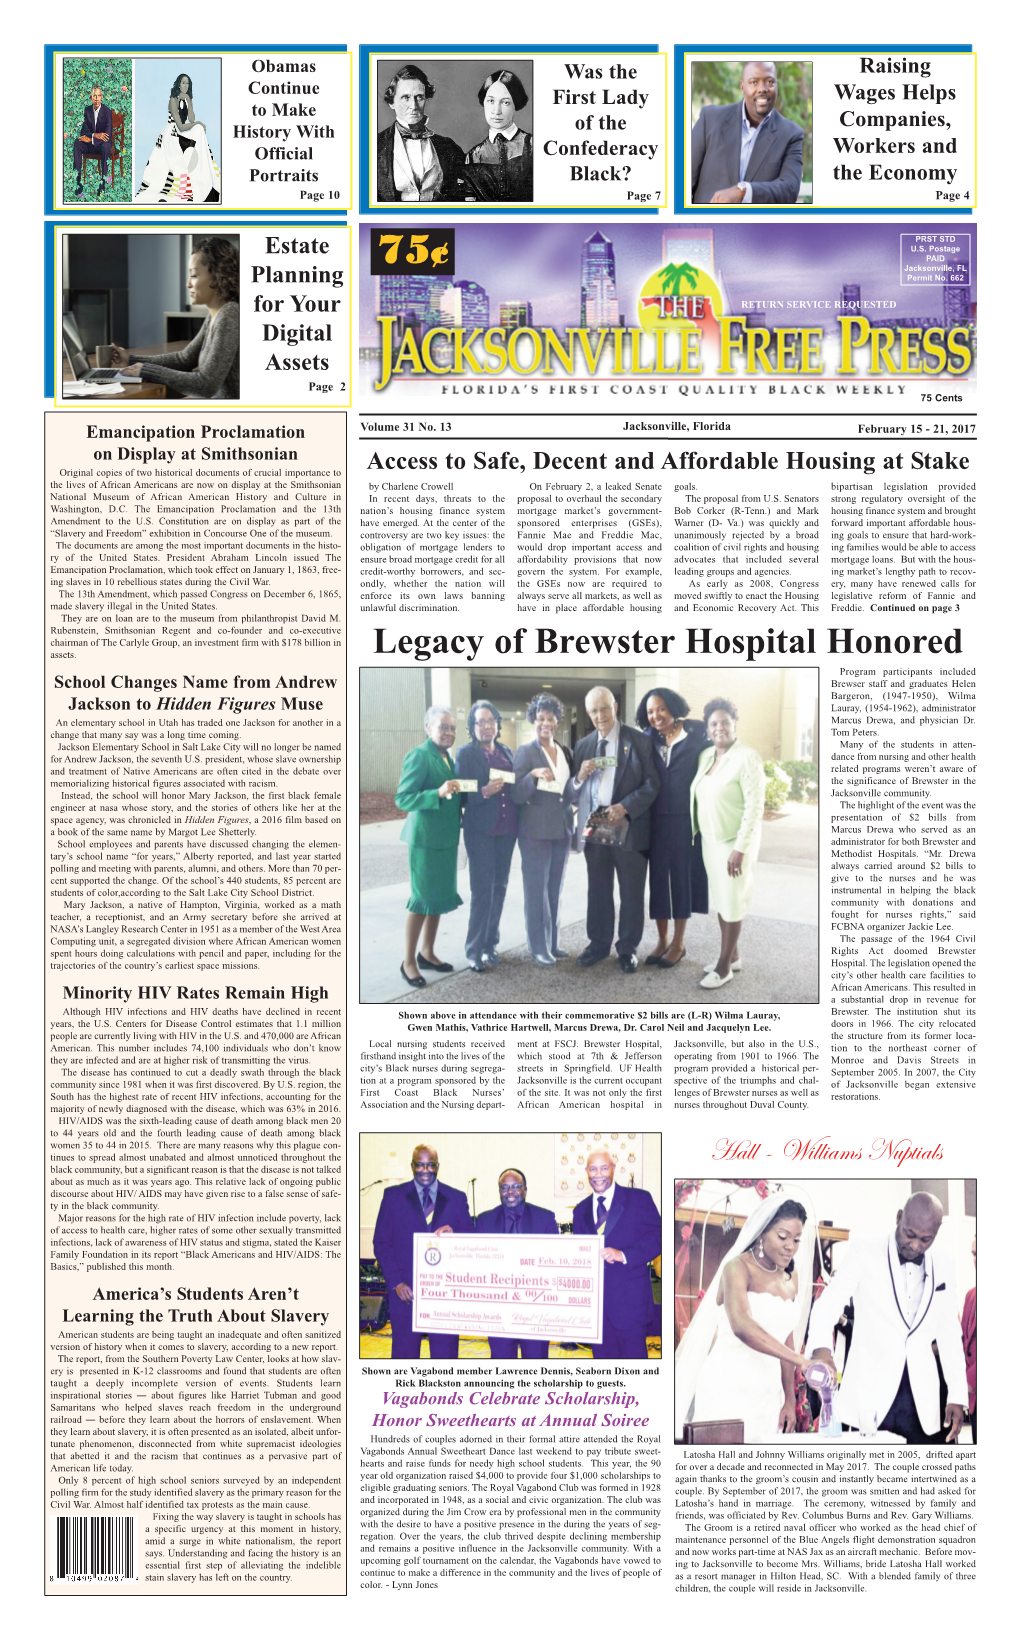 Legacy of Brewster Hospital Honored